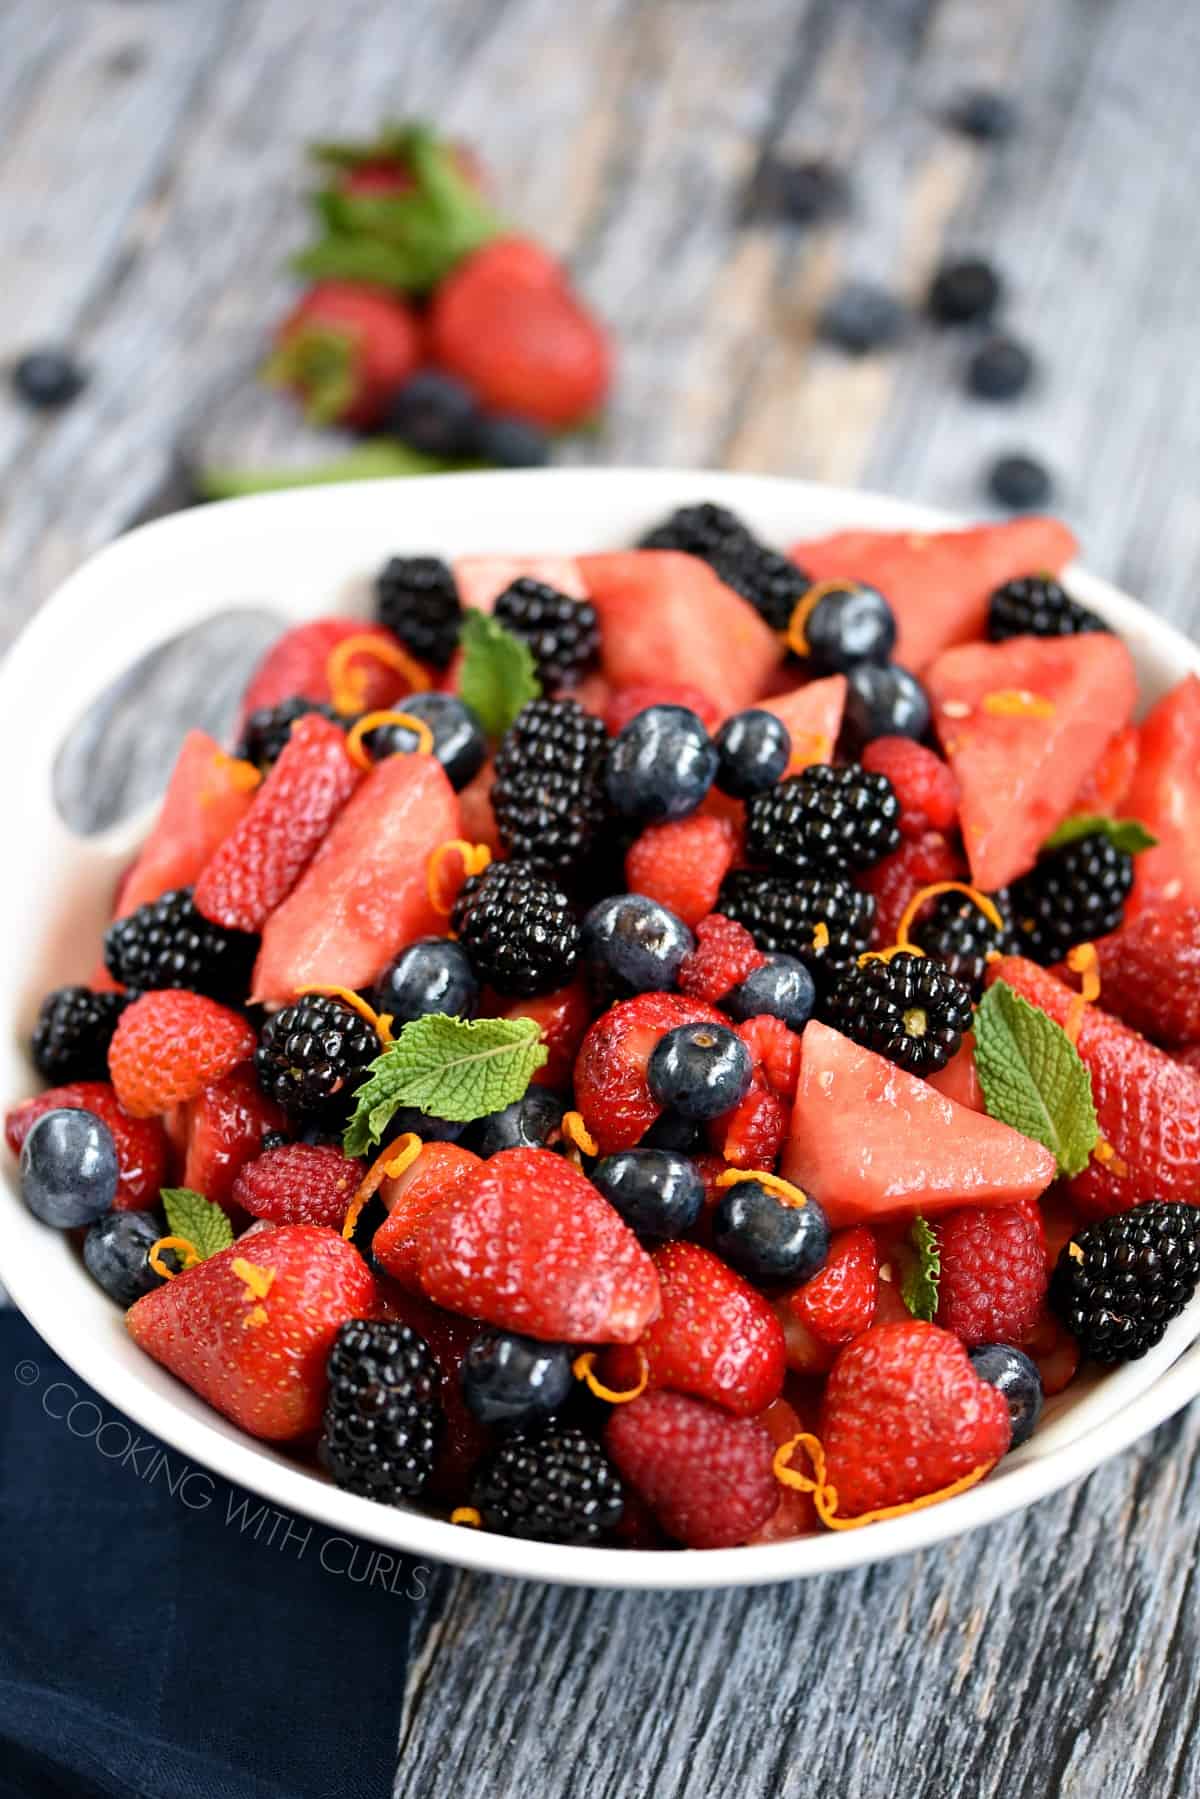 Watermelon wedges, blackberries, blueberries, raspberries and strawberry halves tossed together in a white serving bowl and garnished with mint leaves and orange zest.